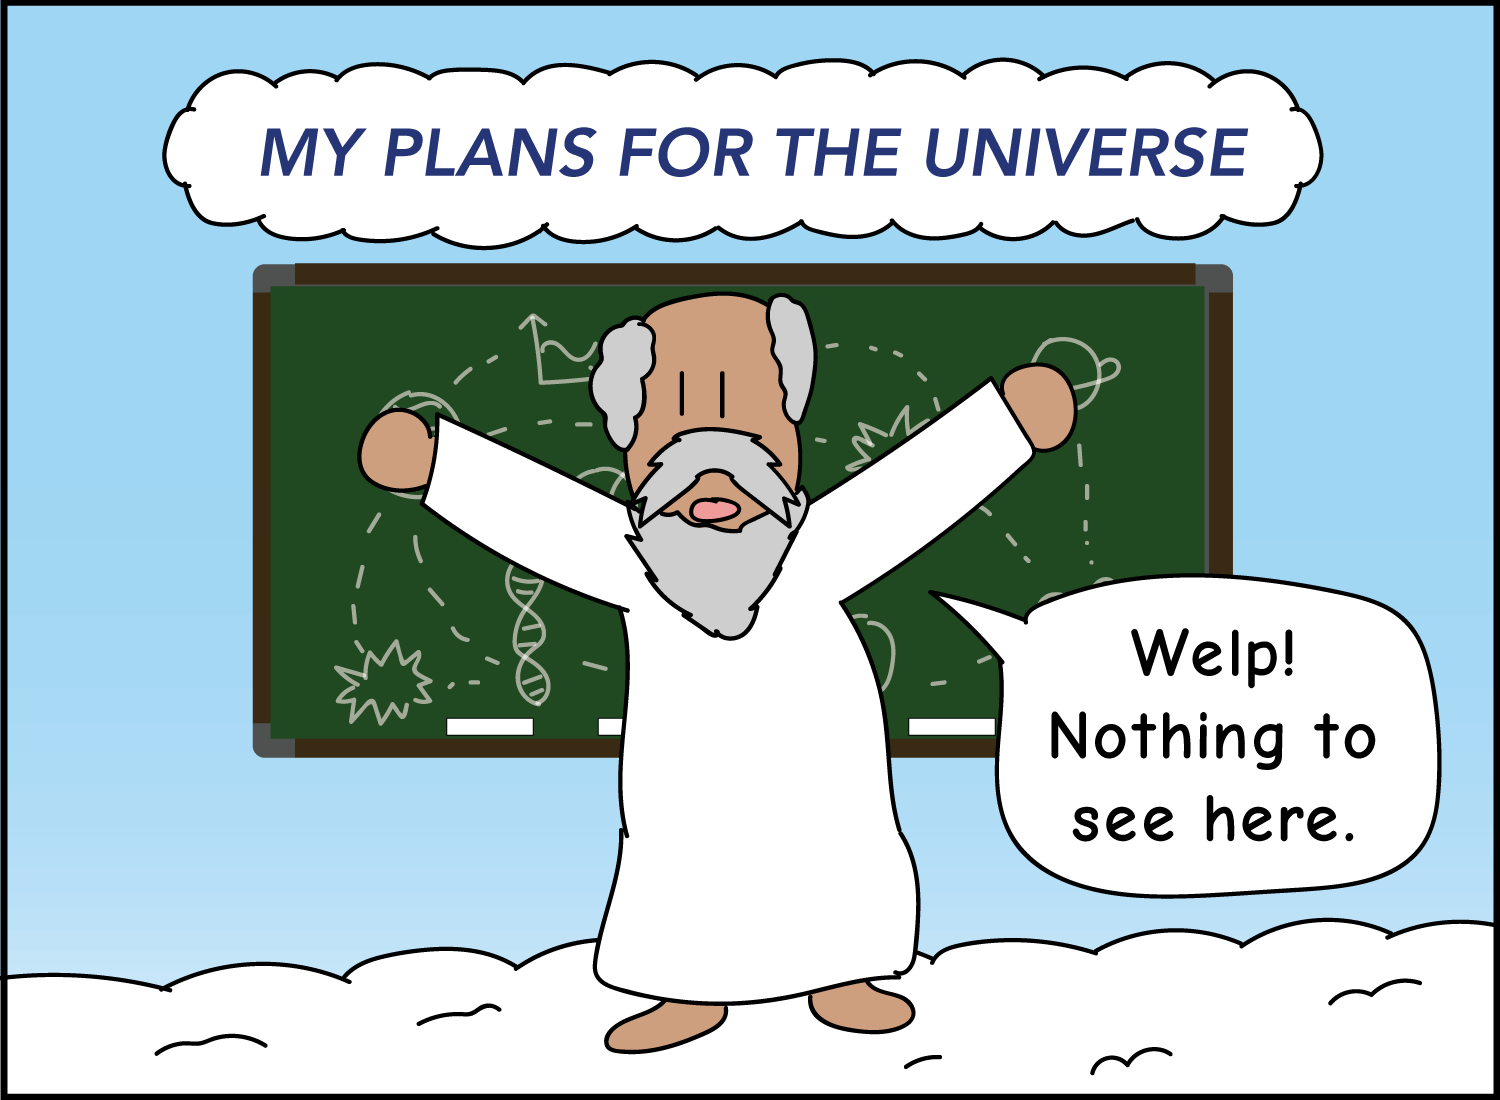 God's plans for the universe